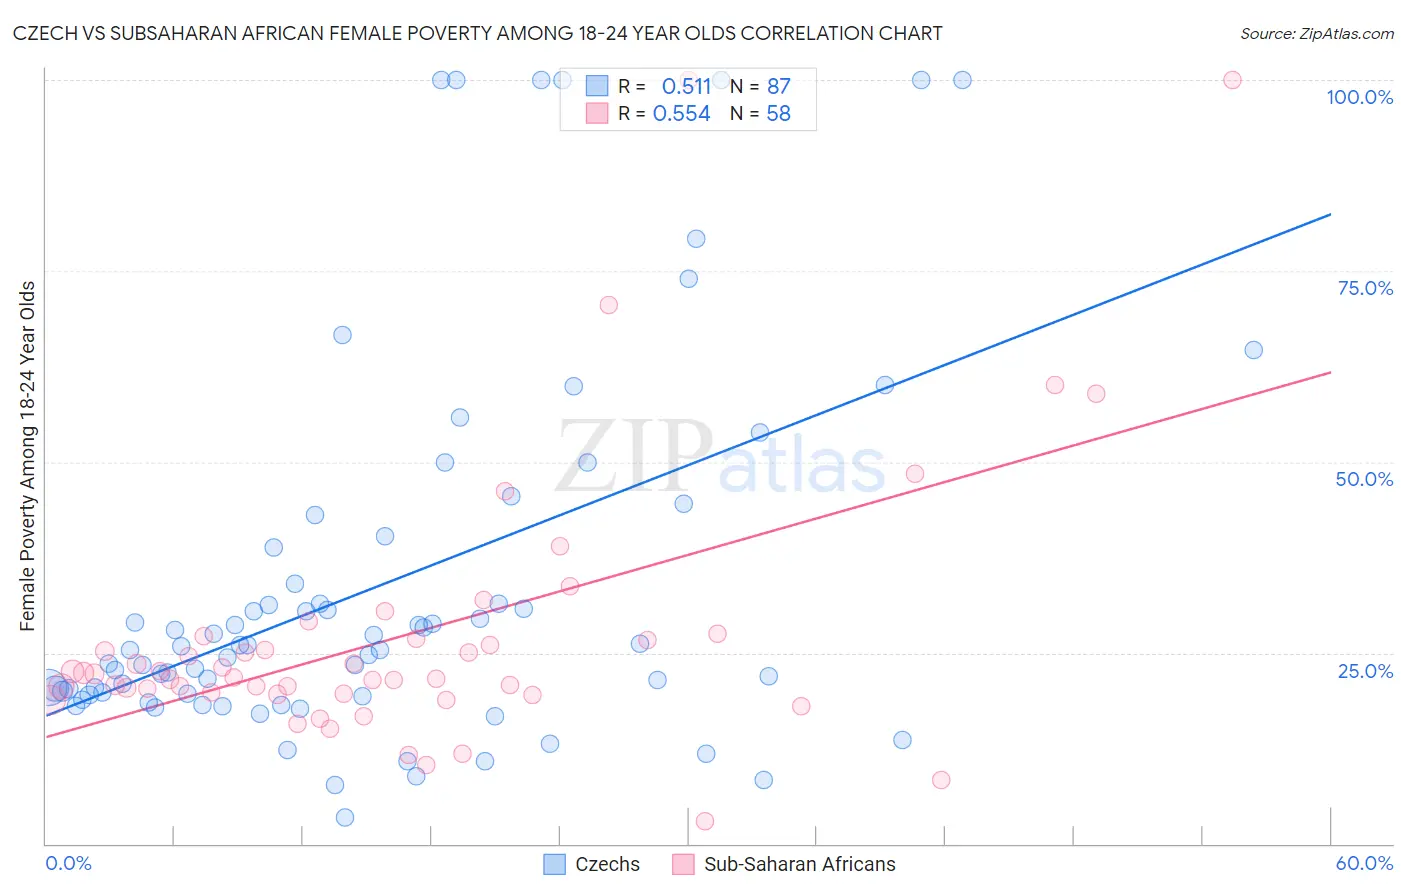 Czech vs Subsaharan African Female Poverty Among 18-24 Year Olds